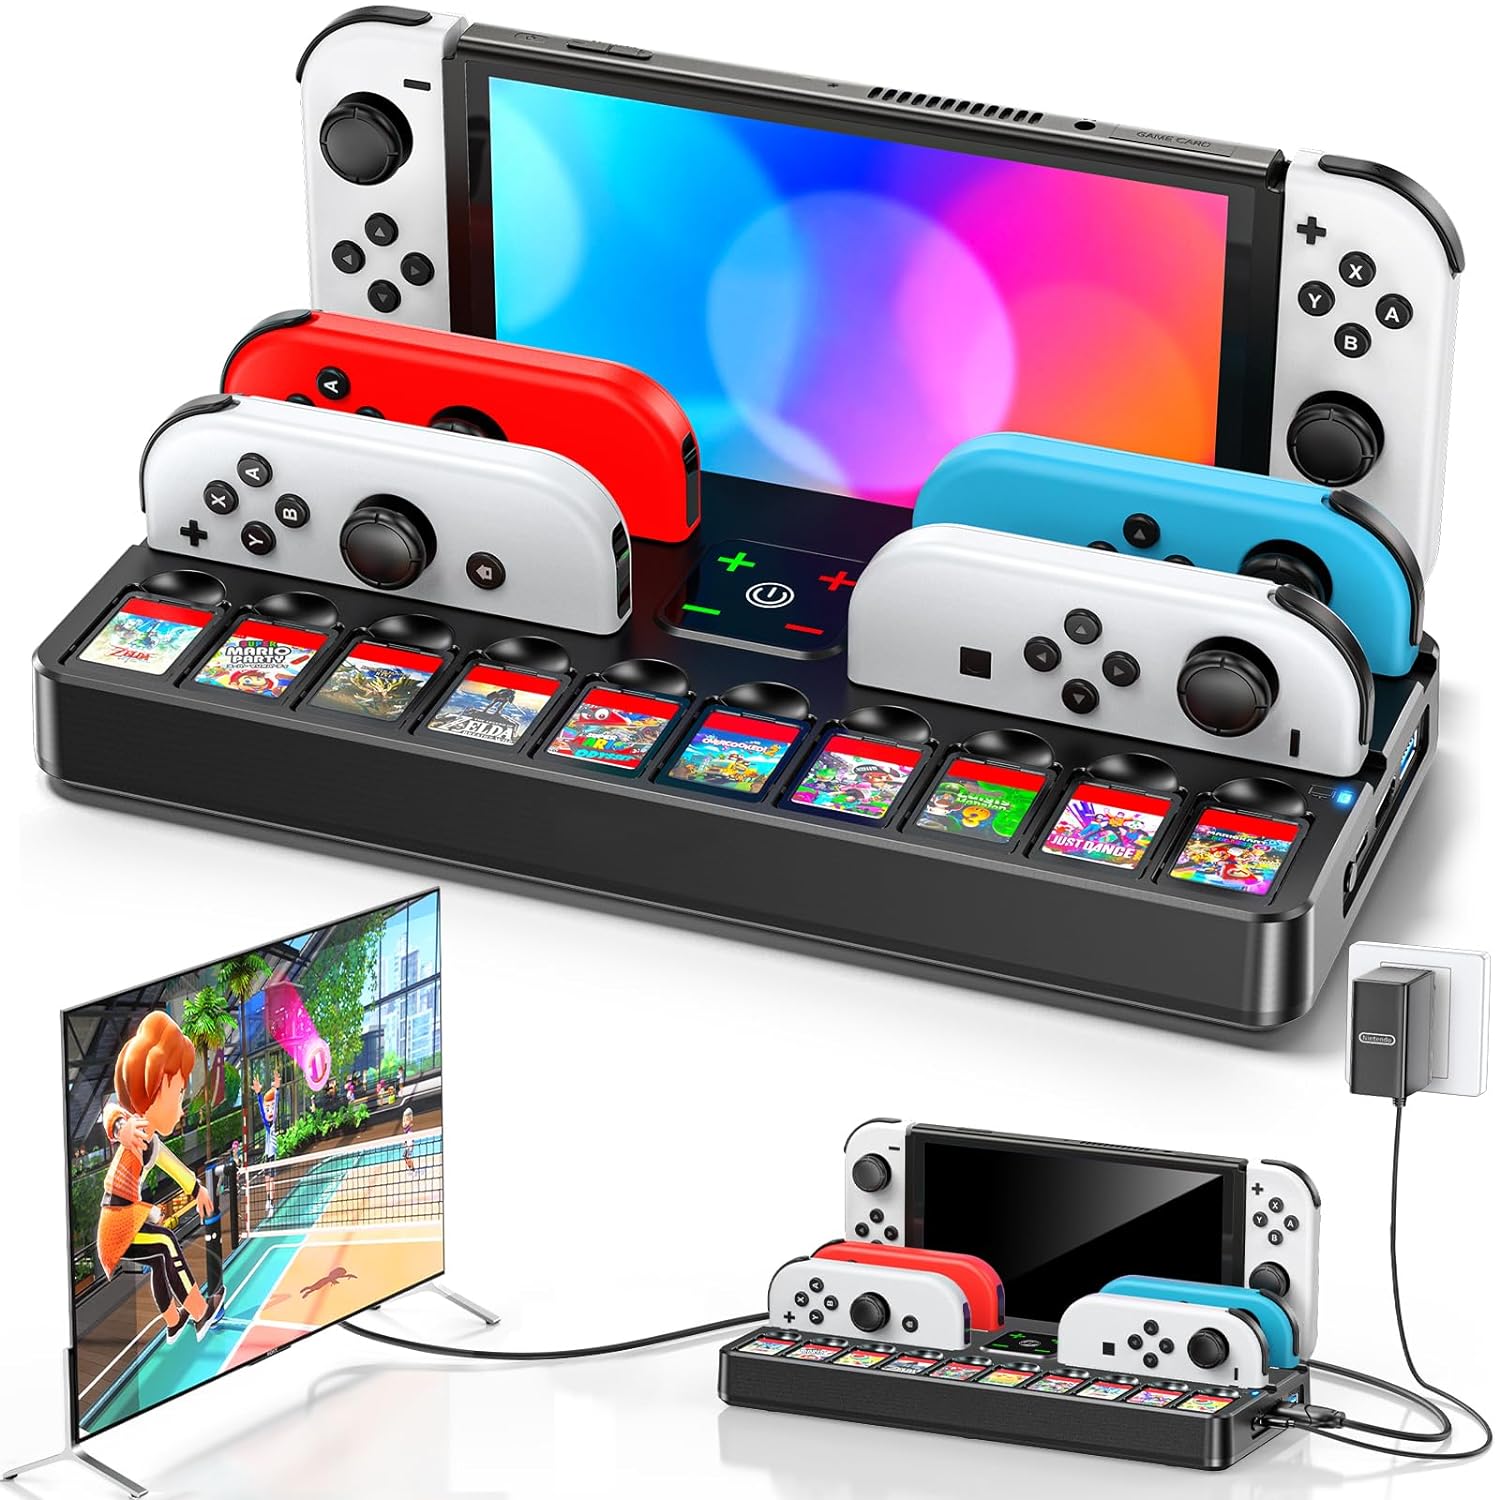 Tokluck Switch TV Dock with Charger for Joycon, Dock for Nintendo Switch/OLED, Charging Dock for Joycon Switch with 4K HDMI, USB 3.0 Port and Slots for 10 Switch Game Cards